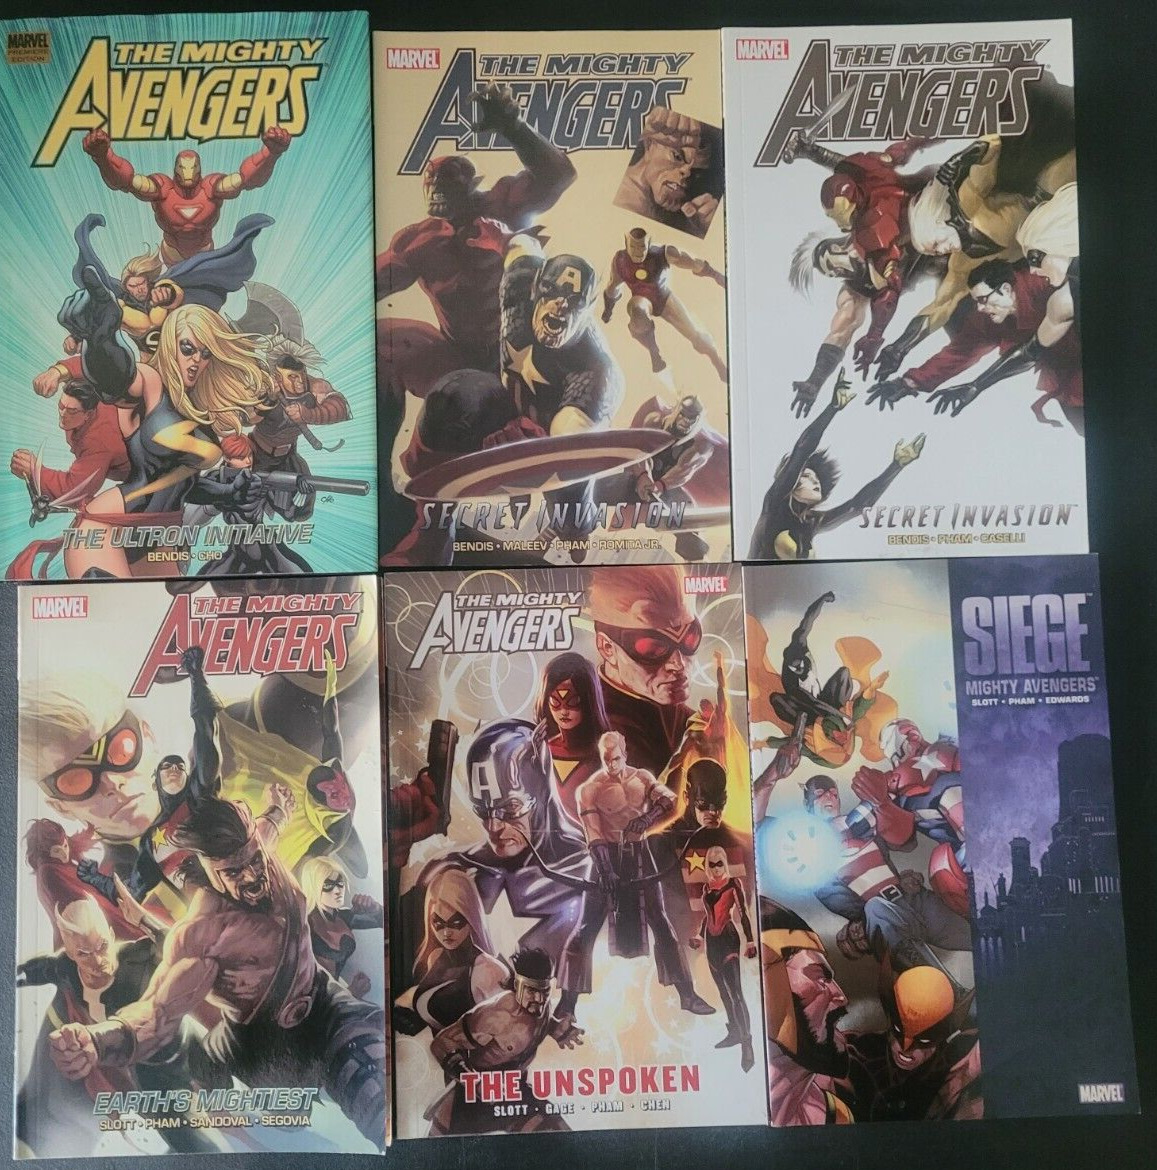 THE MIGHTY AVENGERS Book 1 3 4 5 6 7 (2007) MARVEL COMICS NEW UNREAD SET OF 6